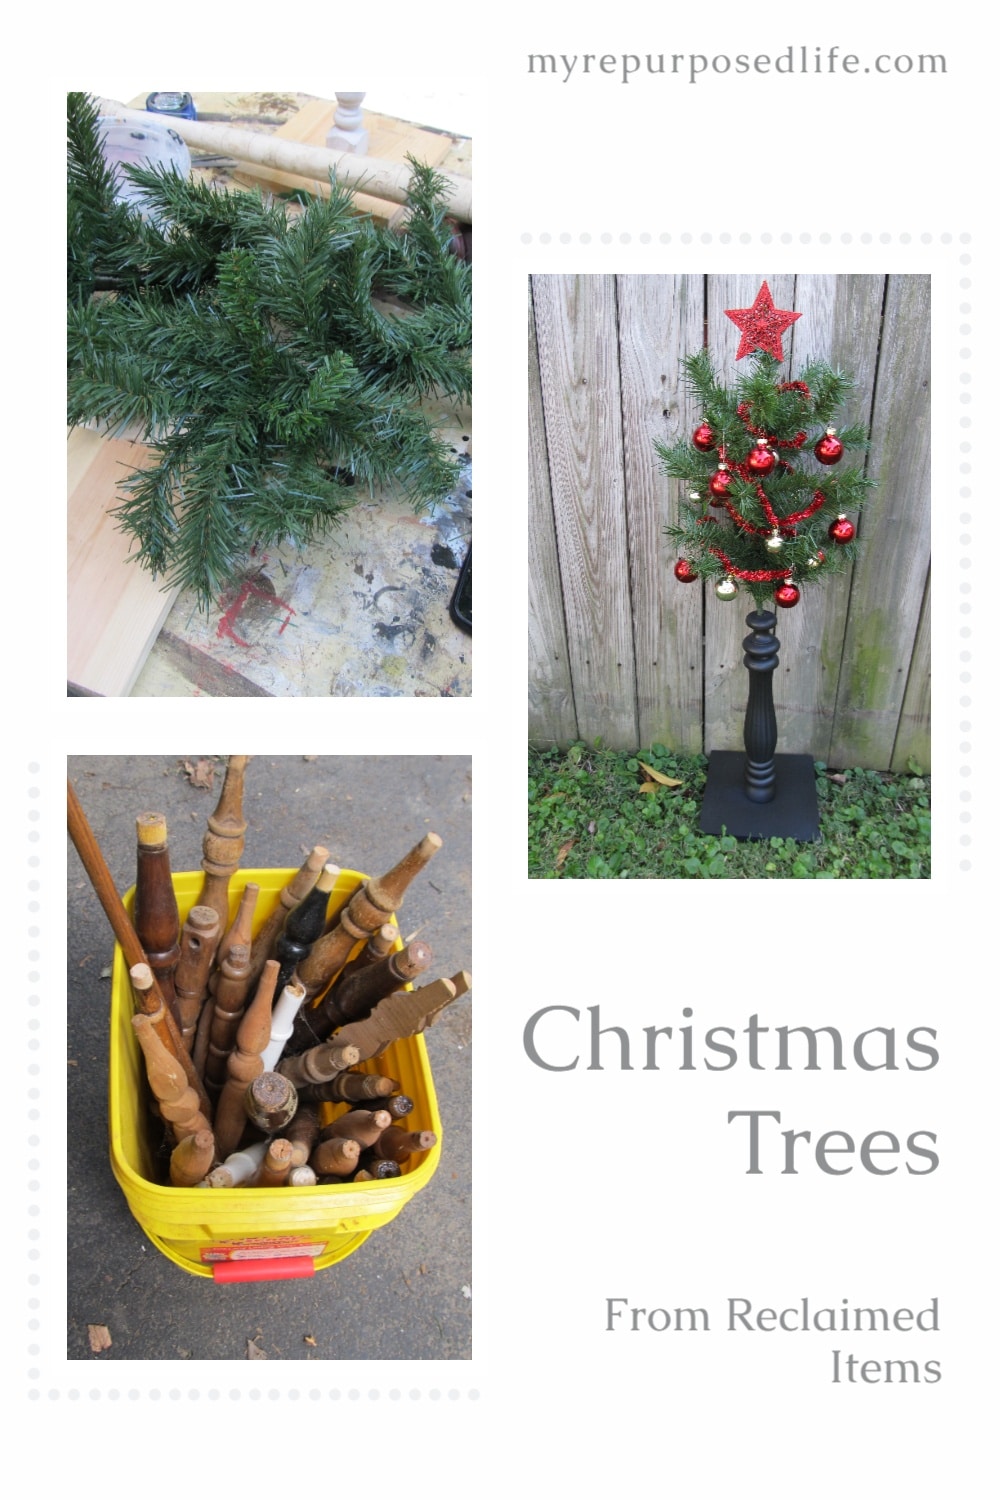 Using upcycled chair spindles and some old Christmas tree branches make a perfect little Christmas tree for small spaces such as nursing homes or hospital. #MyRepurposedLife #repurposed #Christmas via @repurposedlife